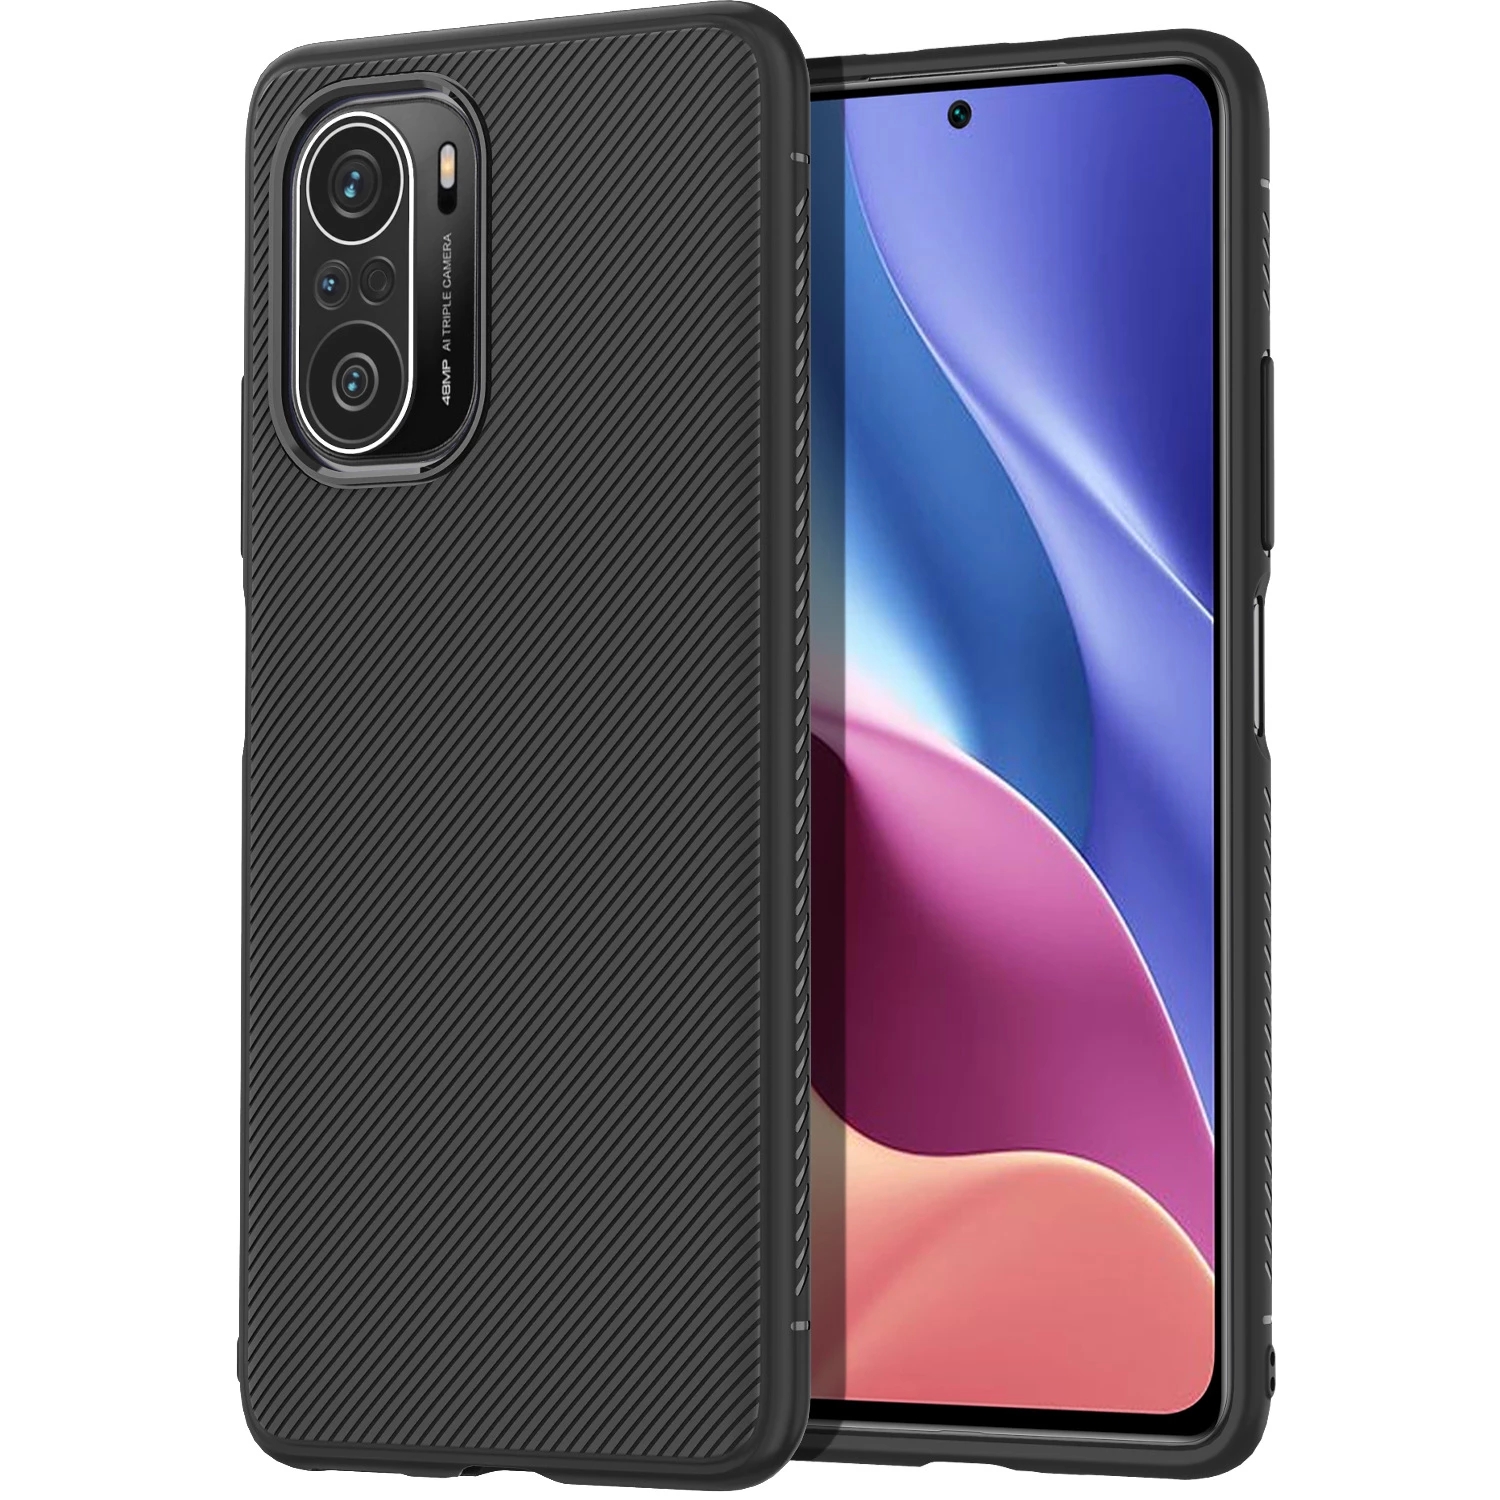 Bakeey-for-POCO-F3-Global-Version-Case-Carbon-Fiber-Texture-Slim-Soft-Silicone-Shockproof-Protective-1844941-3